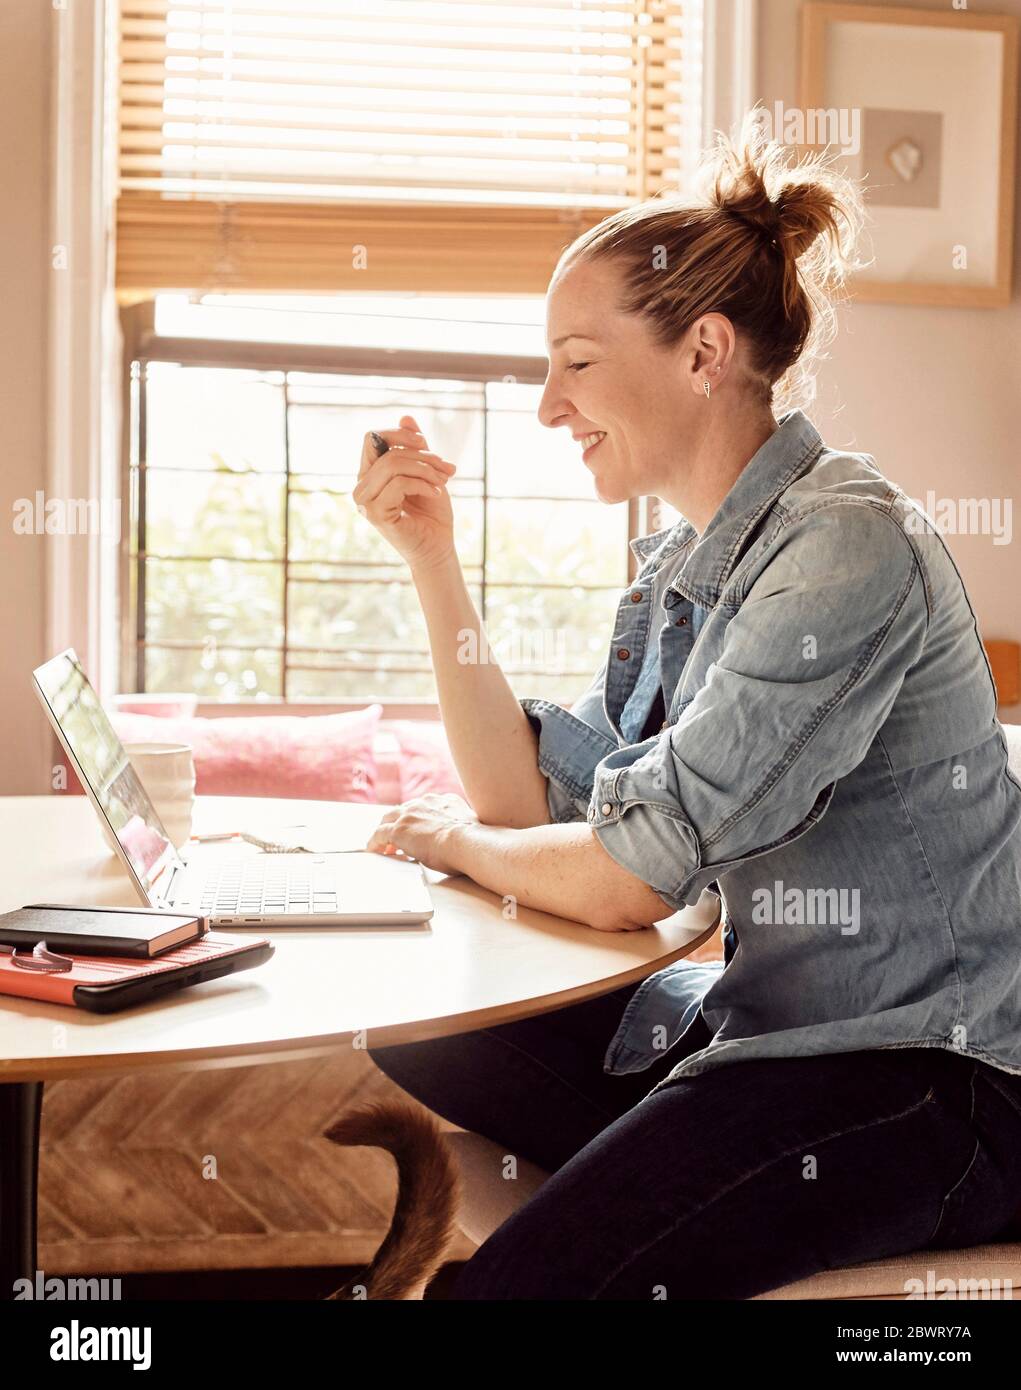 A woman working from home in her sunny kitchen, smiling at the computer. Stock Photo